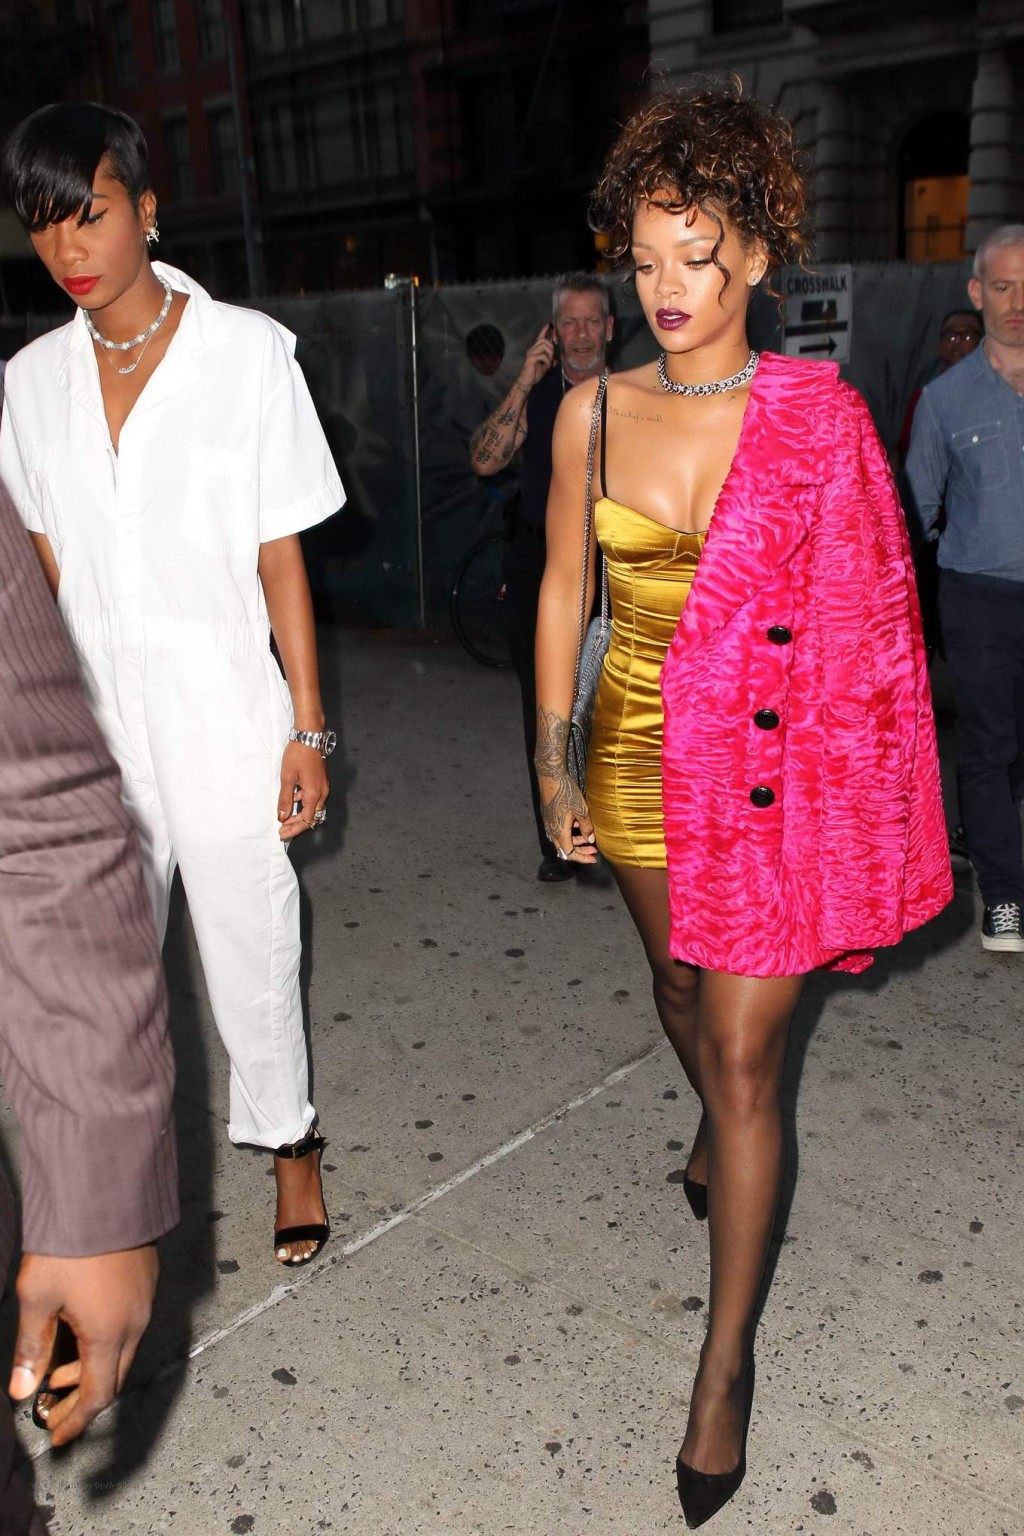 Rihanna shows cleavage and legs wearing a little yellow dress outside Nobu resta #75183428